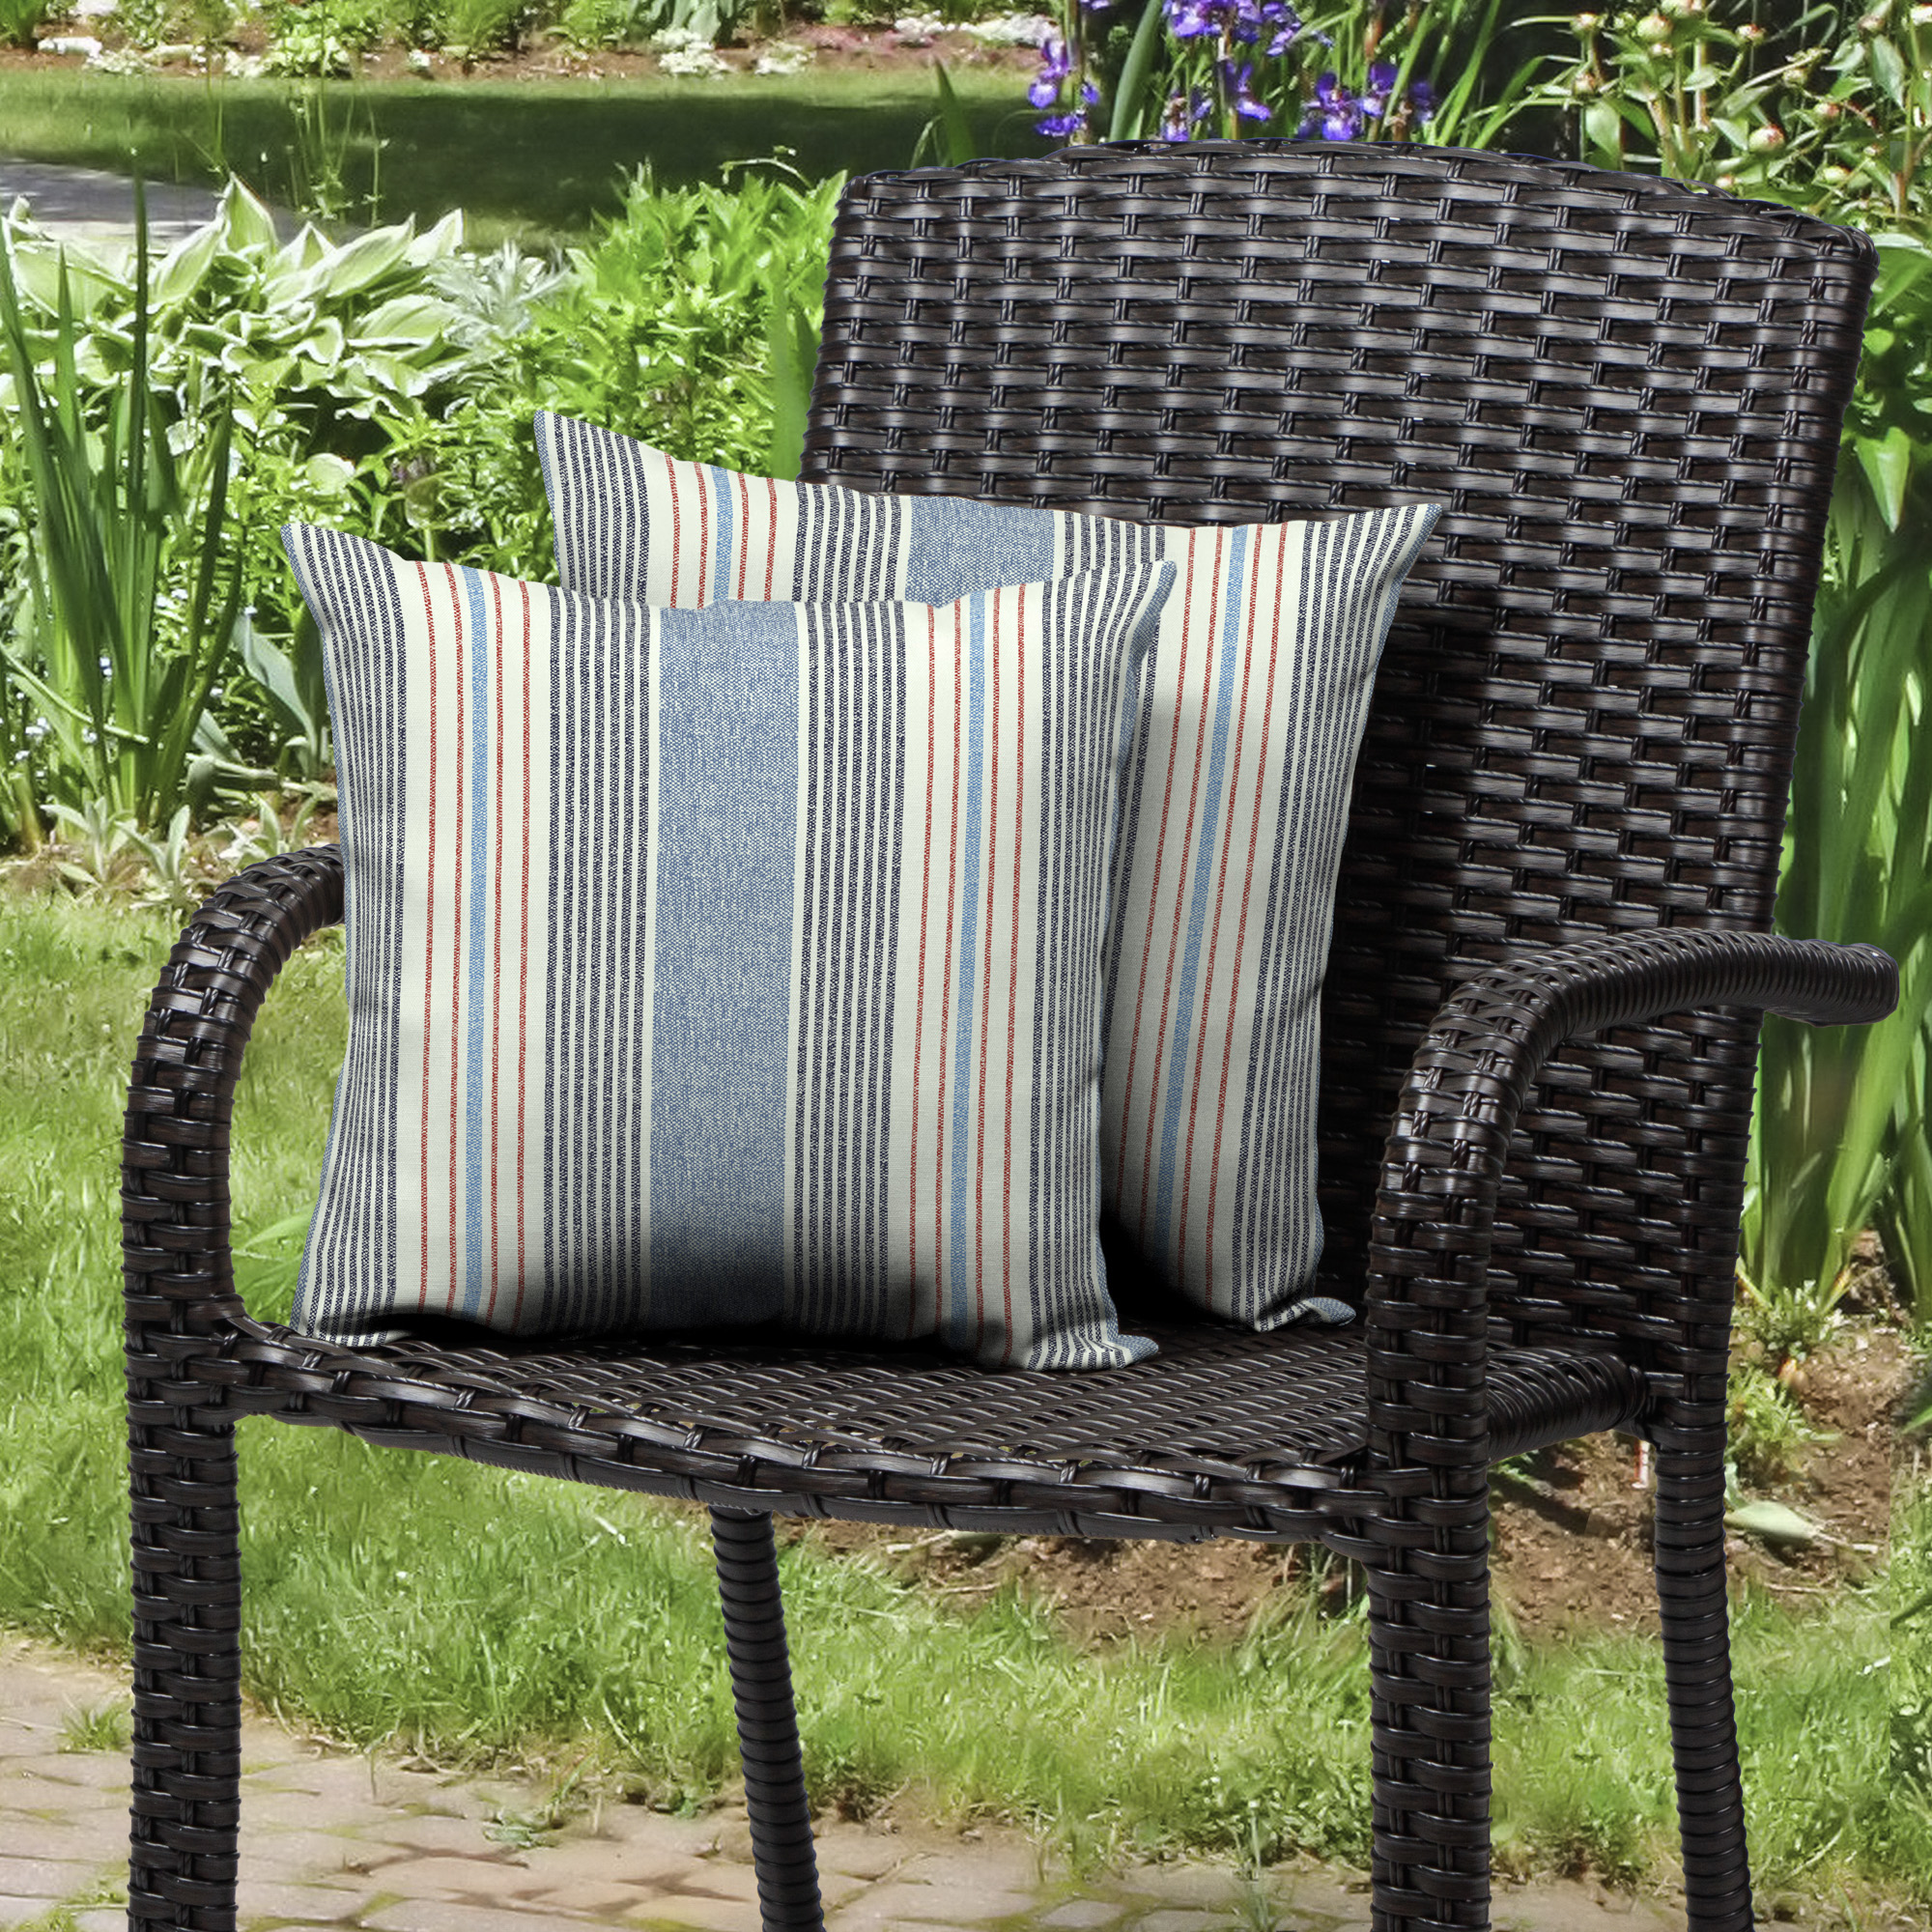 Better Homes & Gardens Hickory Stripe 16 x 16 in. Outdoor Pillow, Set of 2 - image 2 of 7